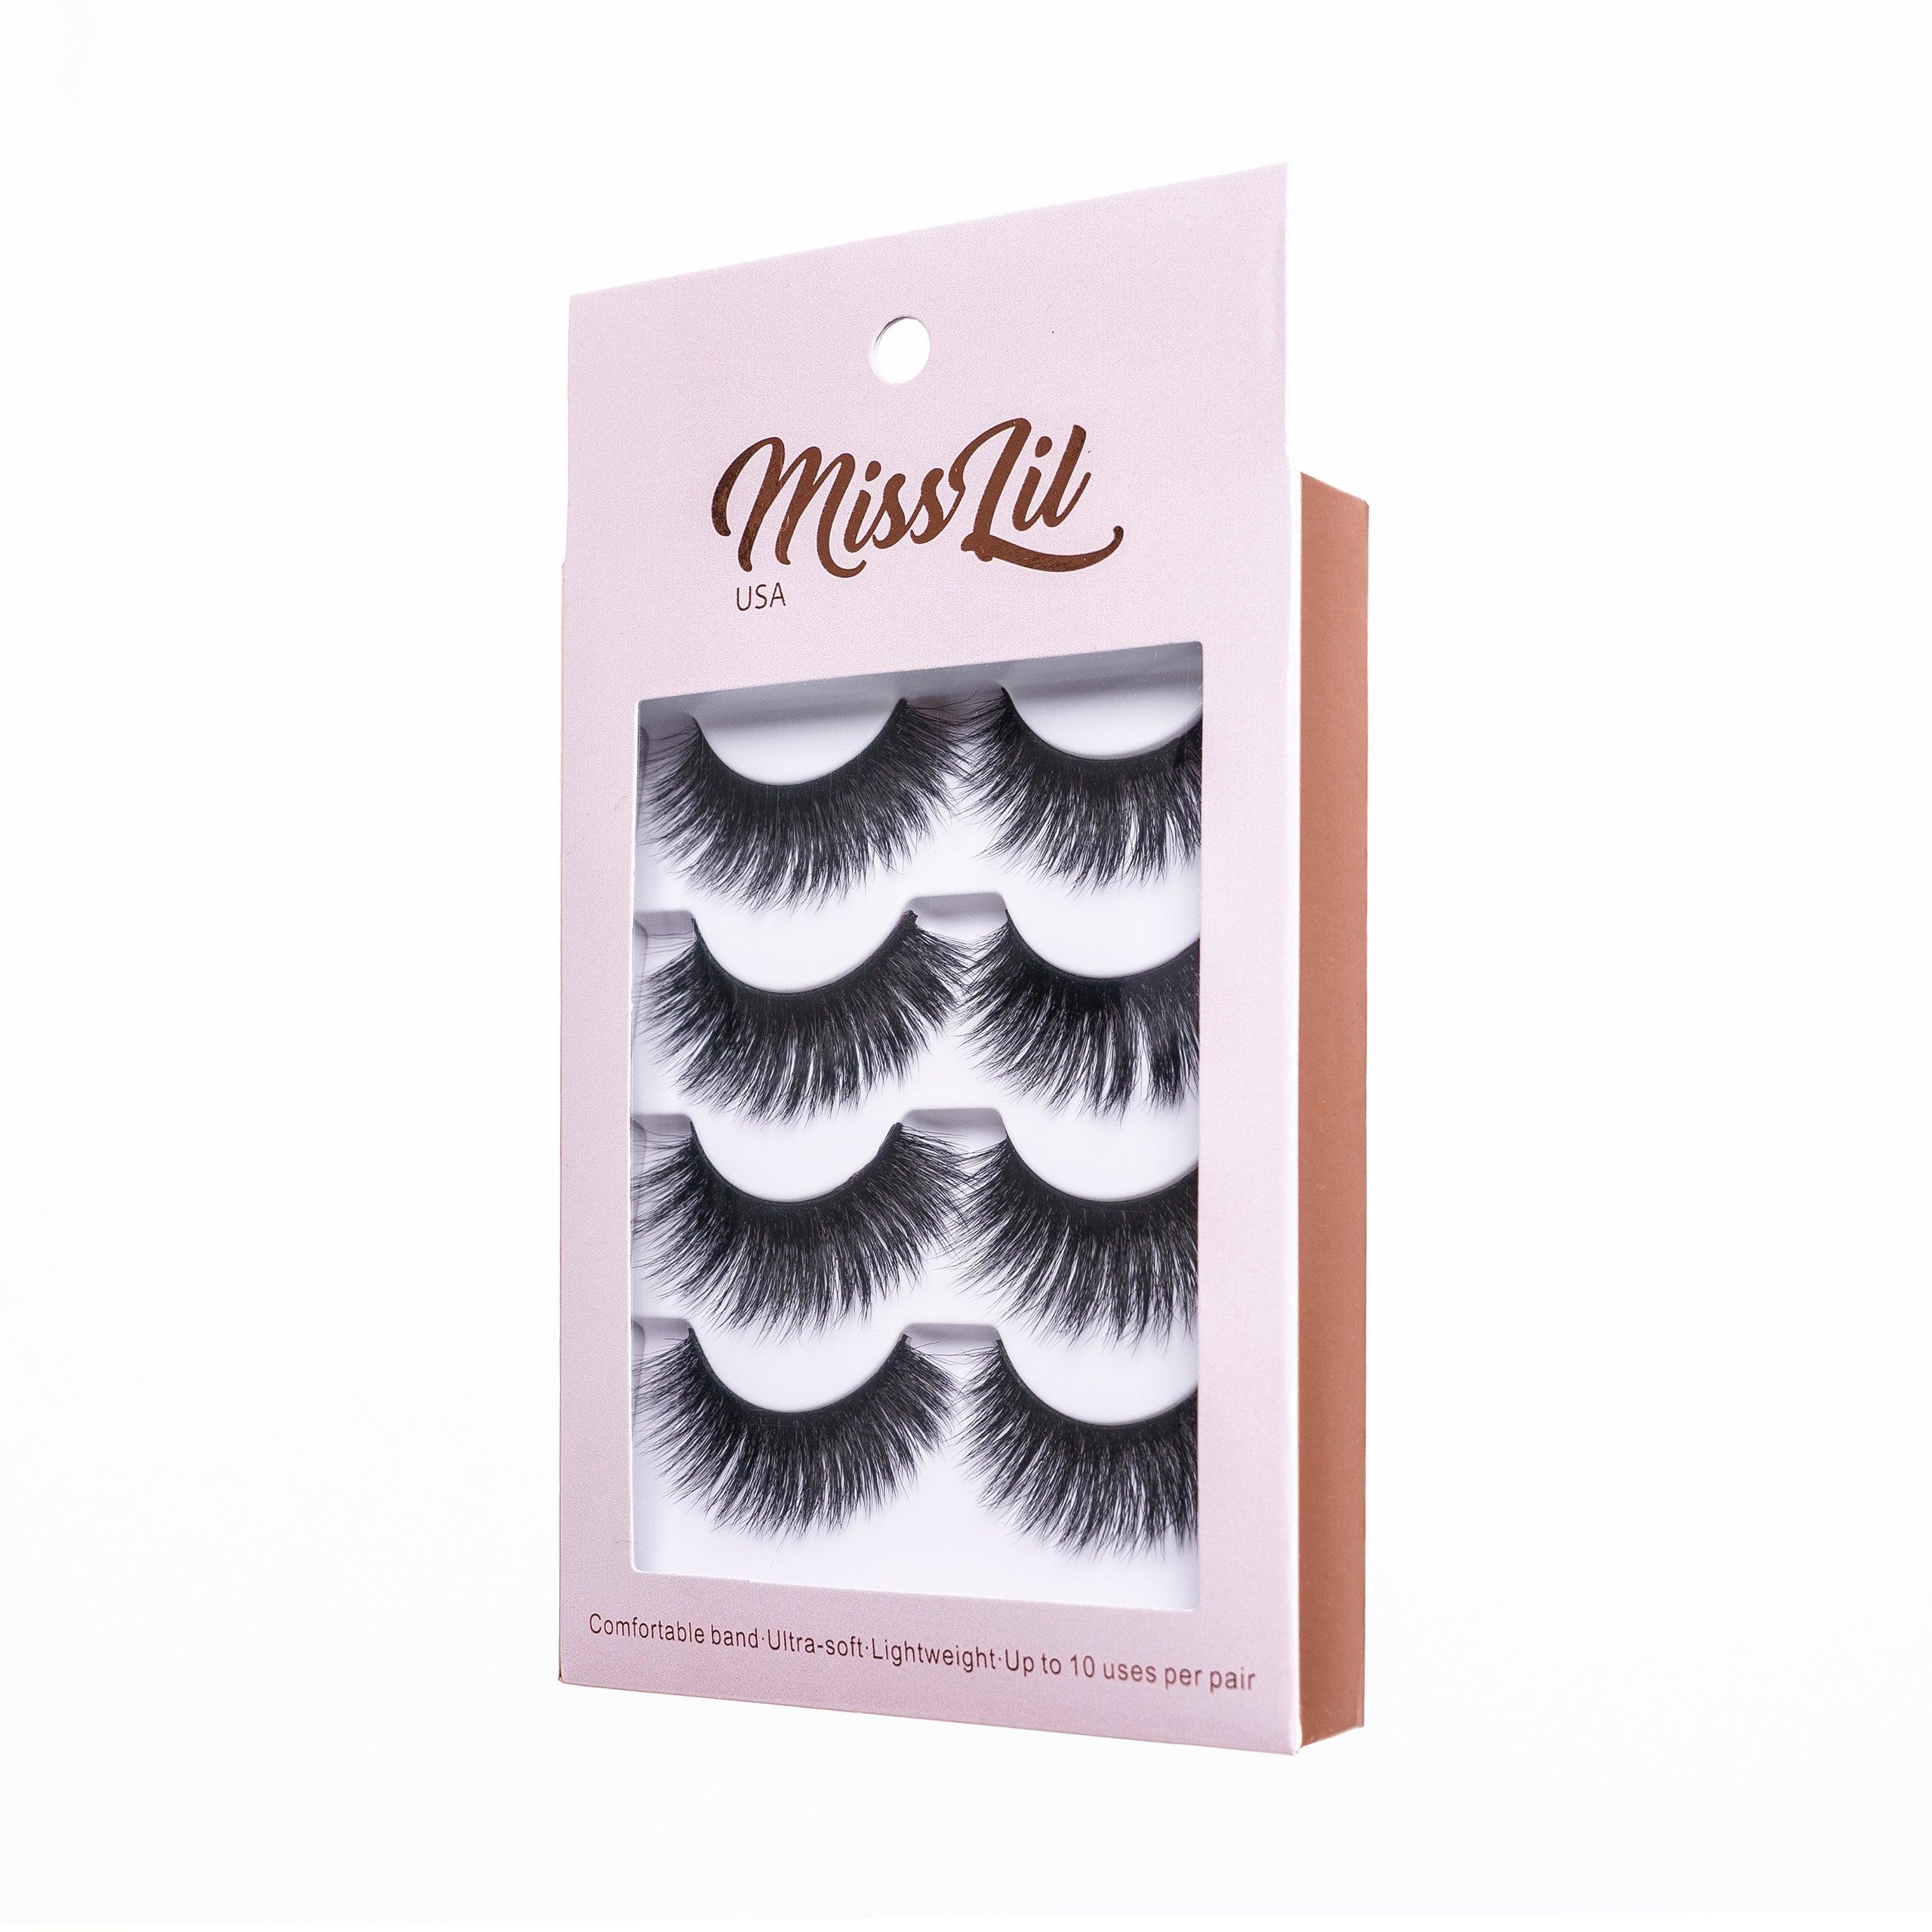 4 Pairs Lashes - Classic Collection #2 - Miss Lil USA